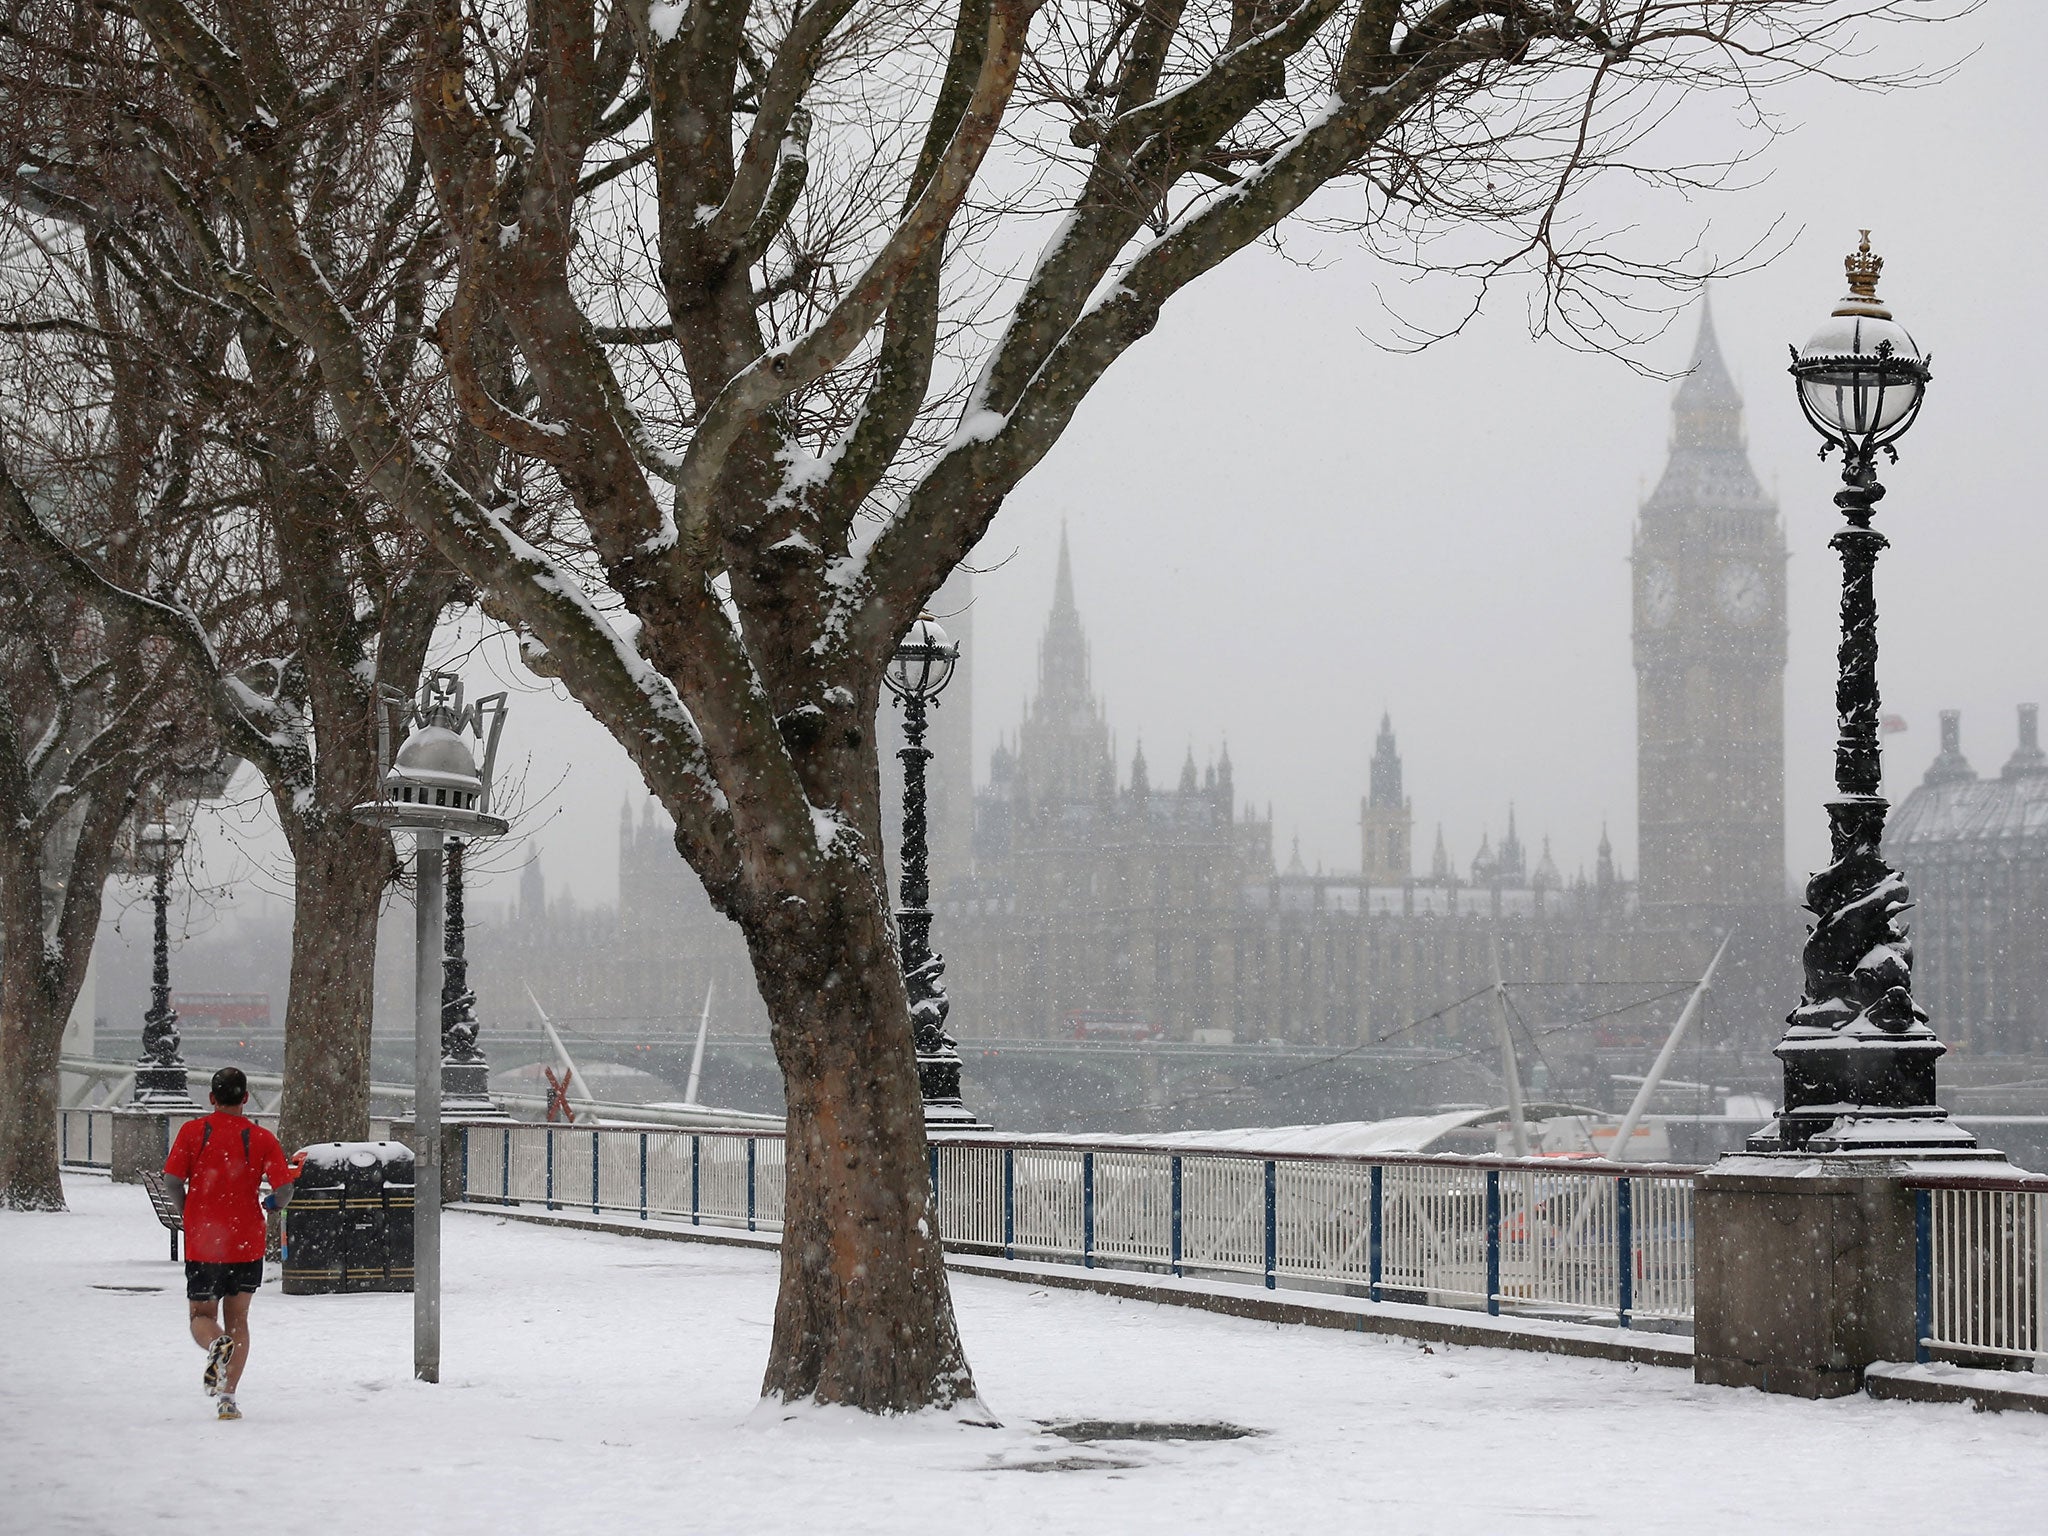 The UK is set for a snowy winter, according to experts